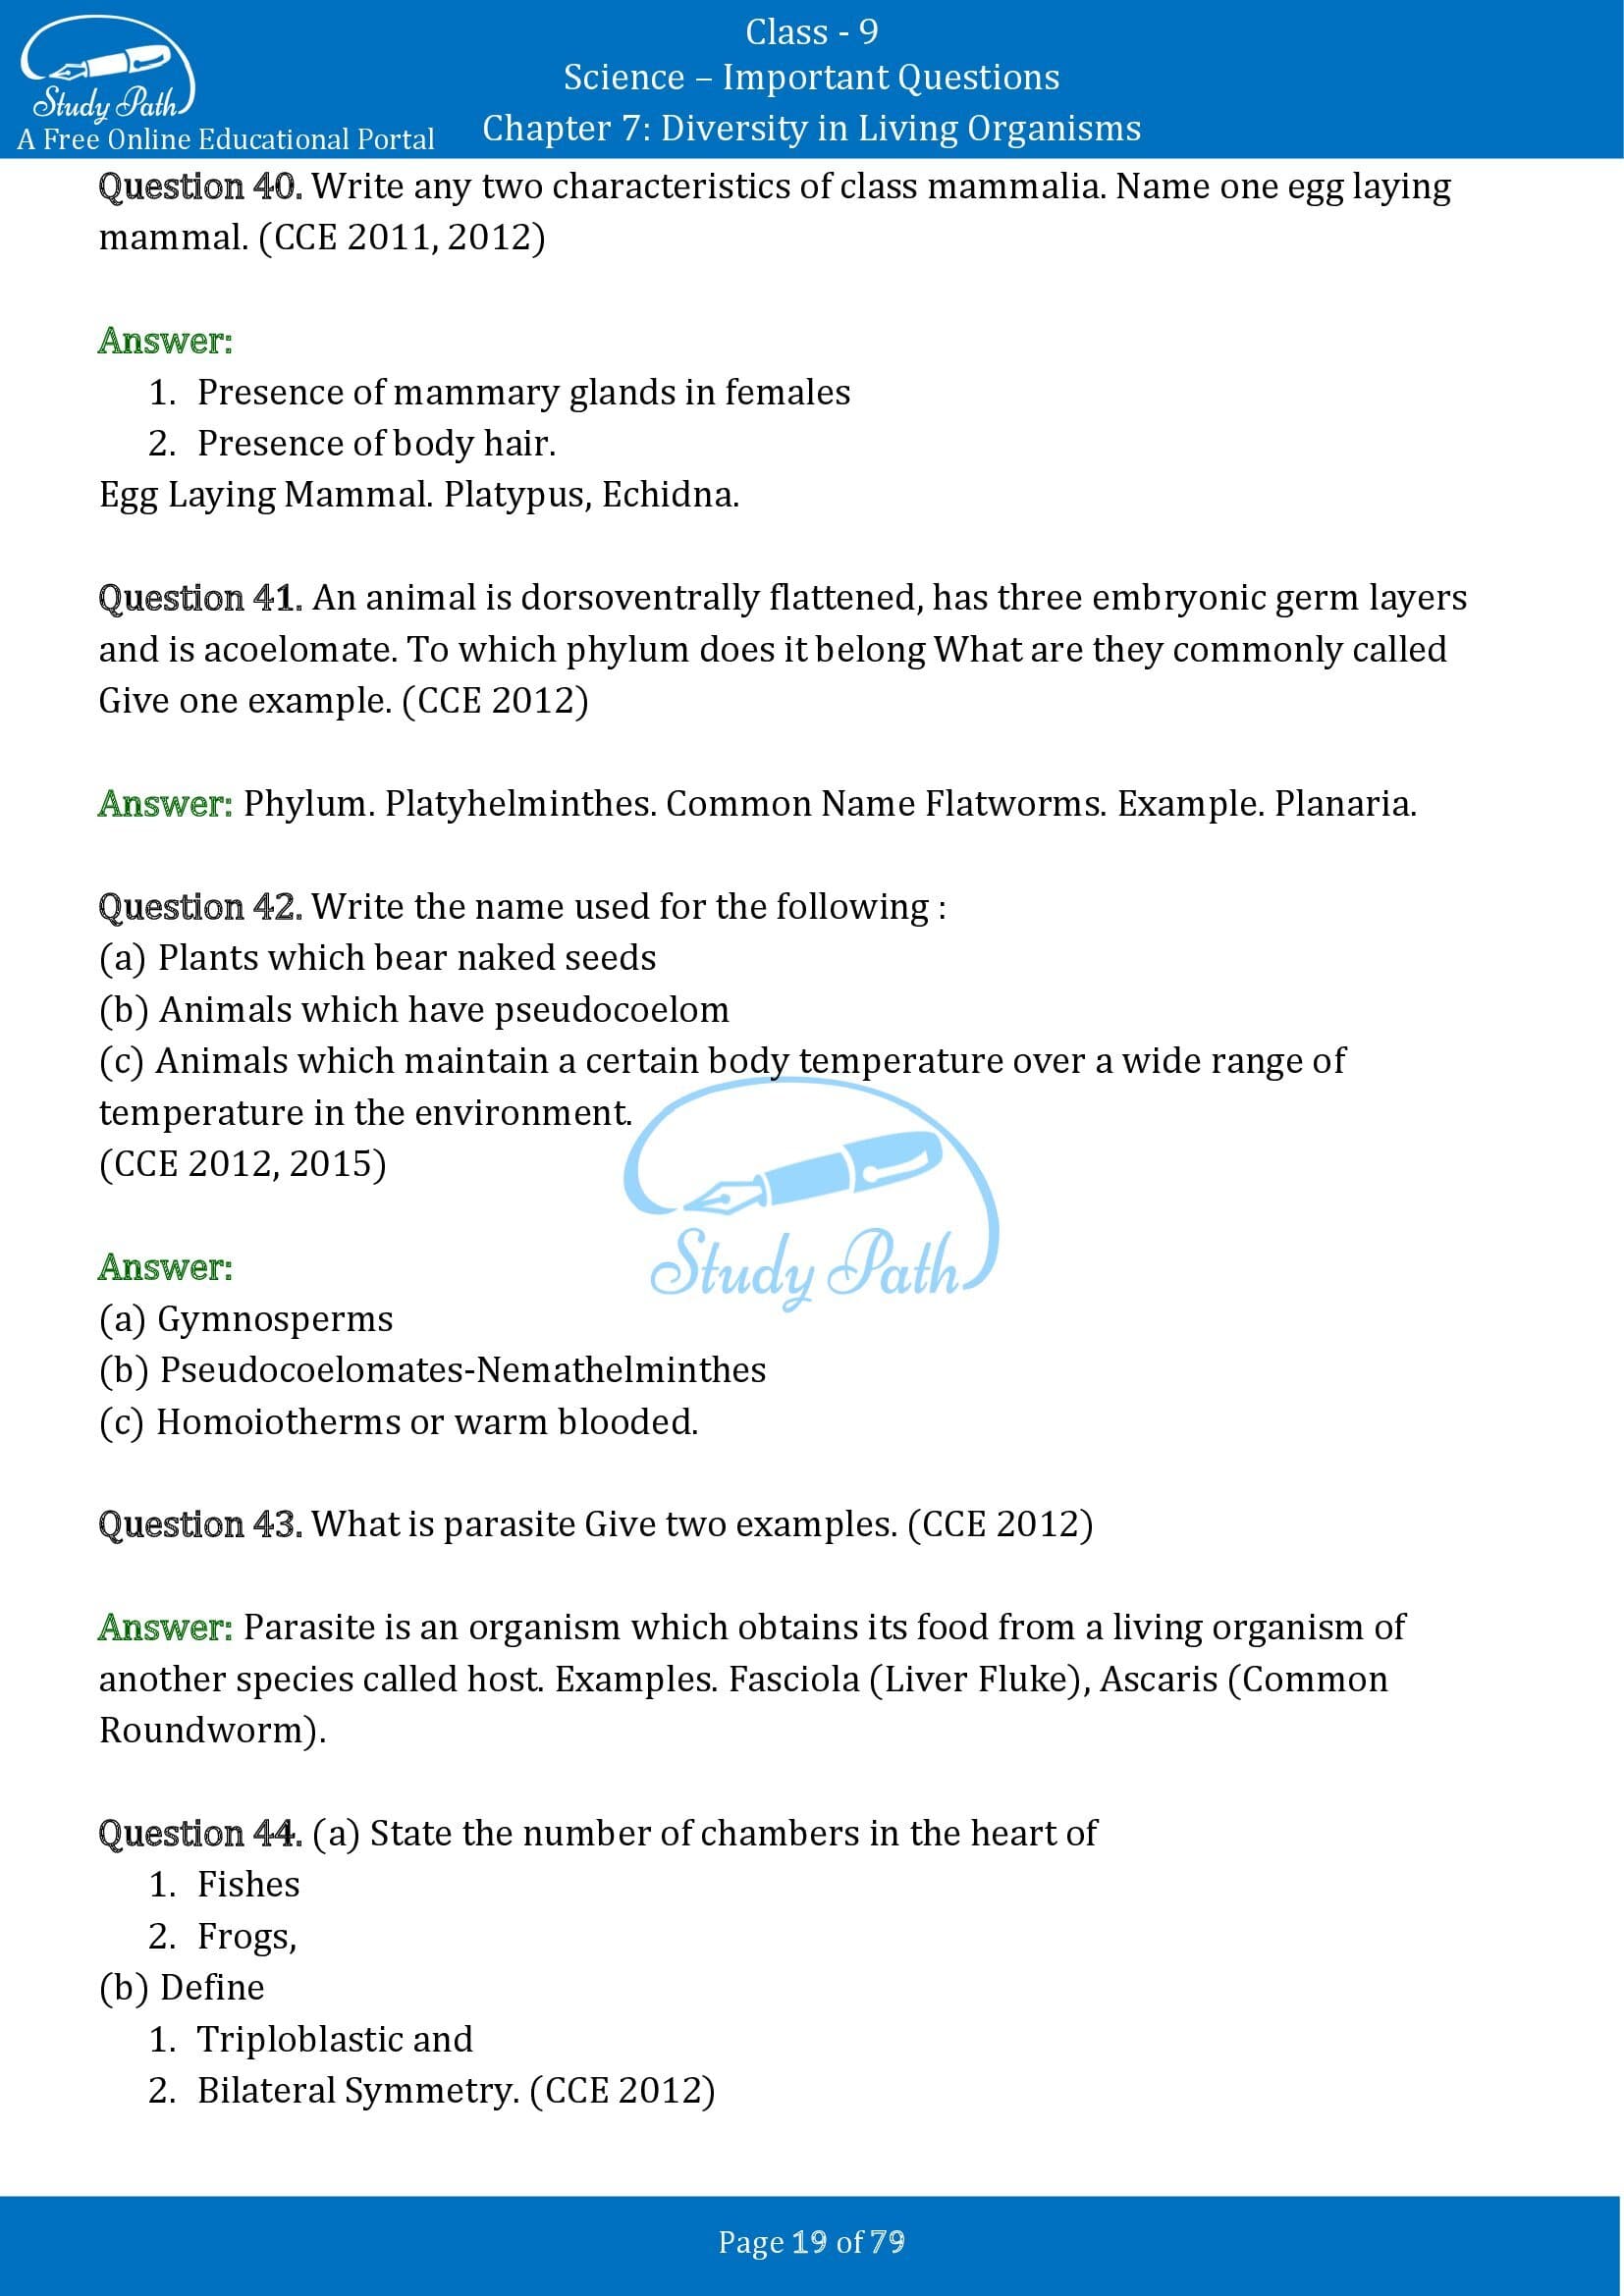 Important Questions for Class 9 Science Chapter 7 Diversity in Living Organisms 00019